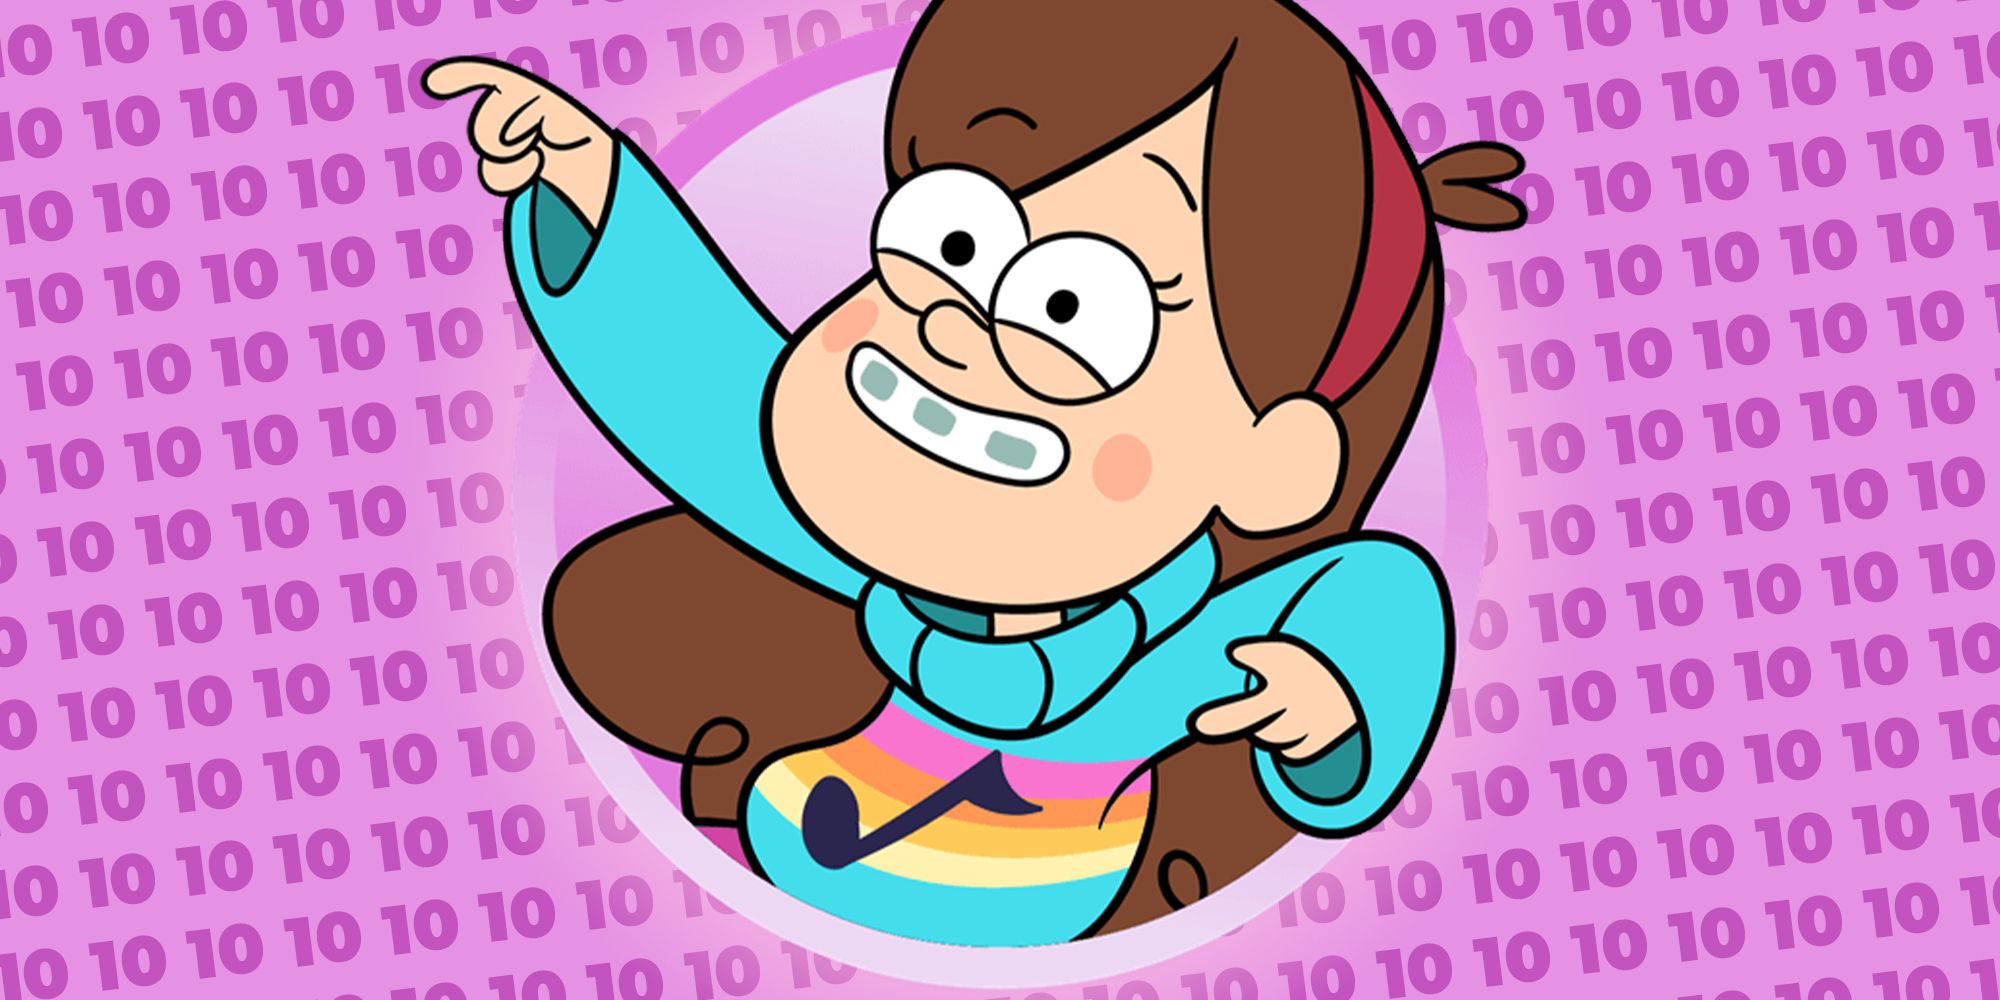 Gravity Falls Remains One Of The Most Influential Cartoons Ever Made